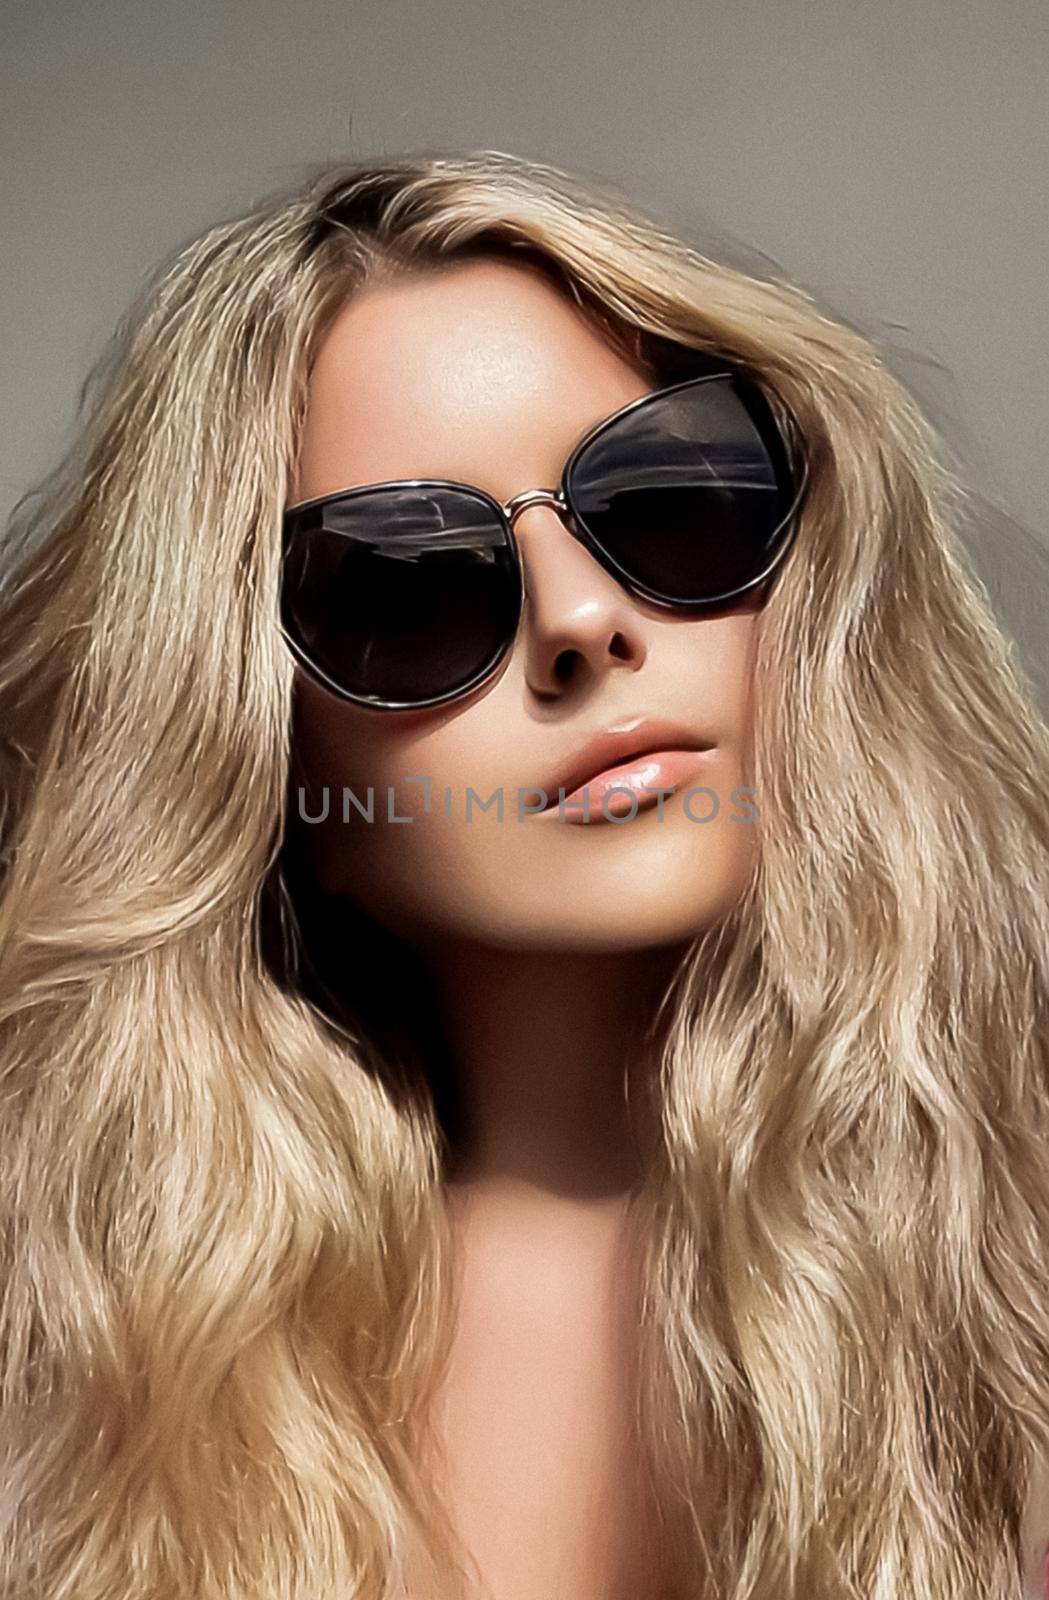 Luxury fashion, blonde hairstyle and accessories, beauty face portrait of a woman with long blond hair, wearing chic sunglasses, glamour style close-up